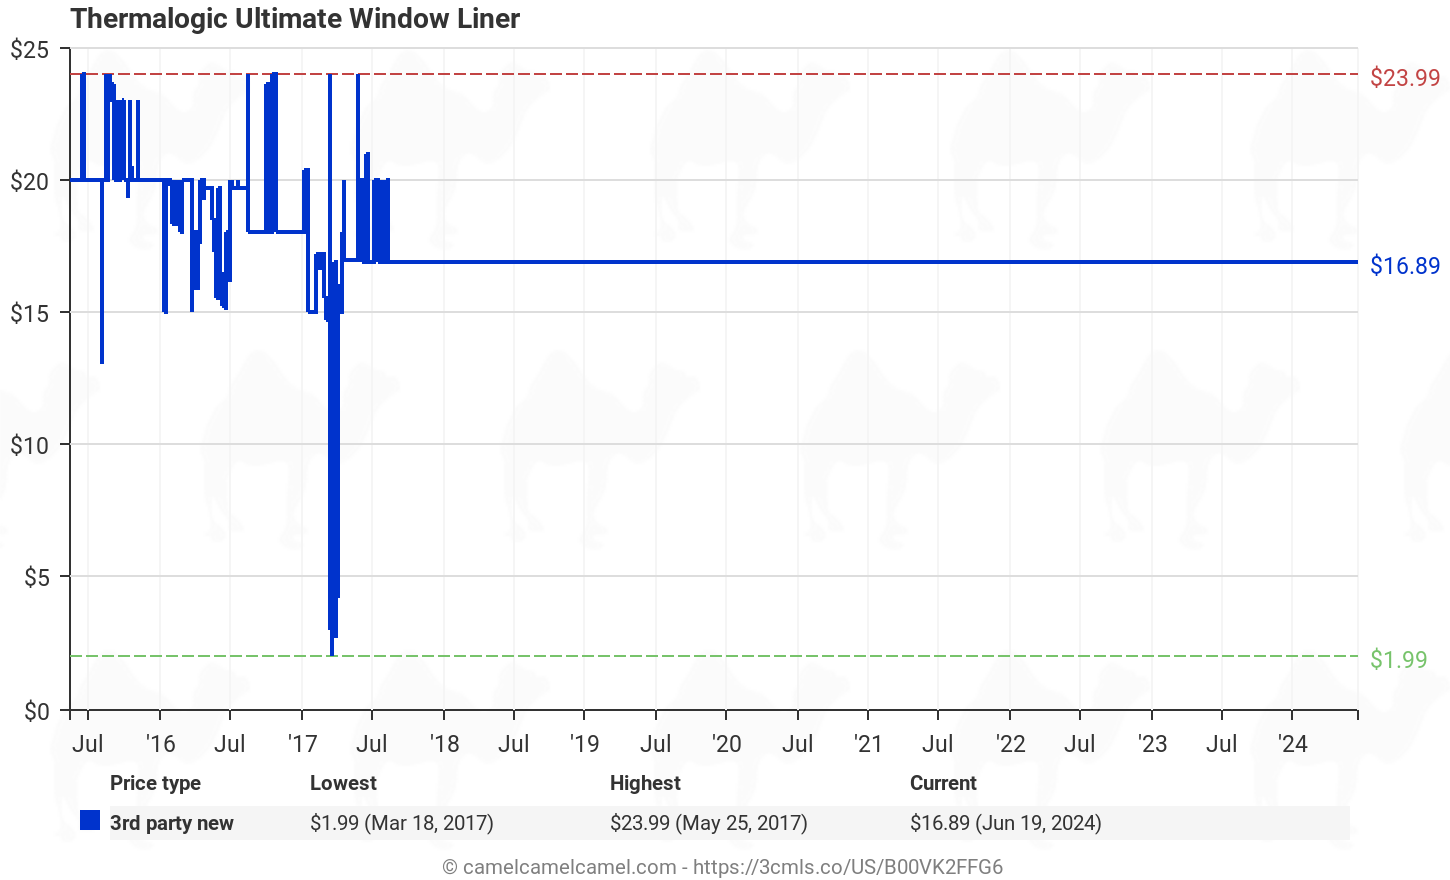 Thermalogic Ultimate Window Liner (B00VK2FFG6) | Amazon price ... - Amazon price history chart for Thermalogic Ultimate Window Liner  (B00VK2FFG6)